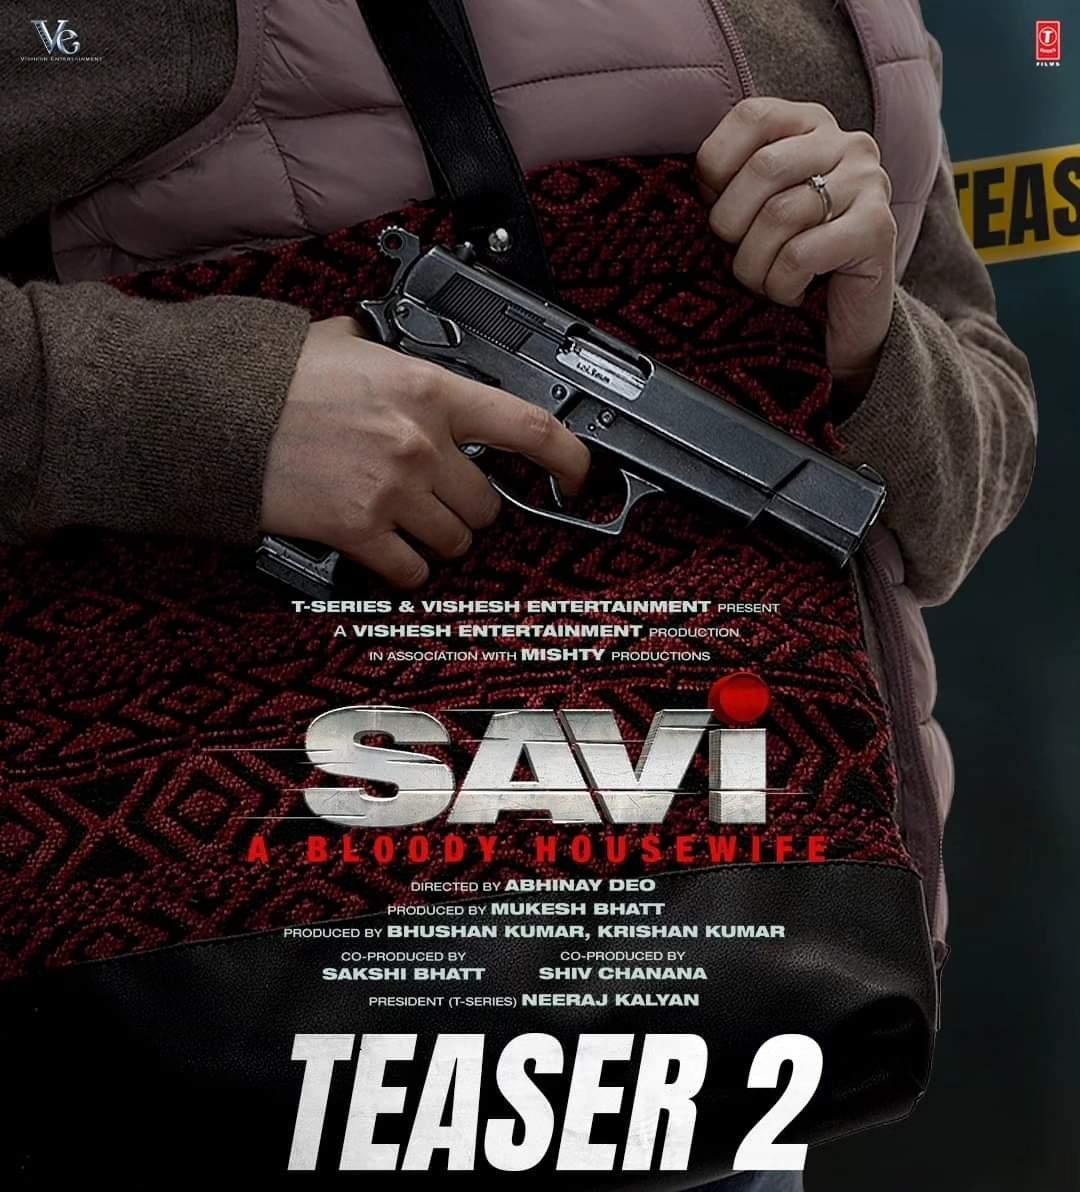 #SaviABloodyHousewife Teaser 2 Out Now. 

youtu.be/DNujELbSNNU?si…

Releasing in cinemas 31st May, 2024.

Starring #AnilKapoor #DivyaKhossla & #HarshvardhanRane.

Directed by #AbhinayDeo.